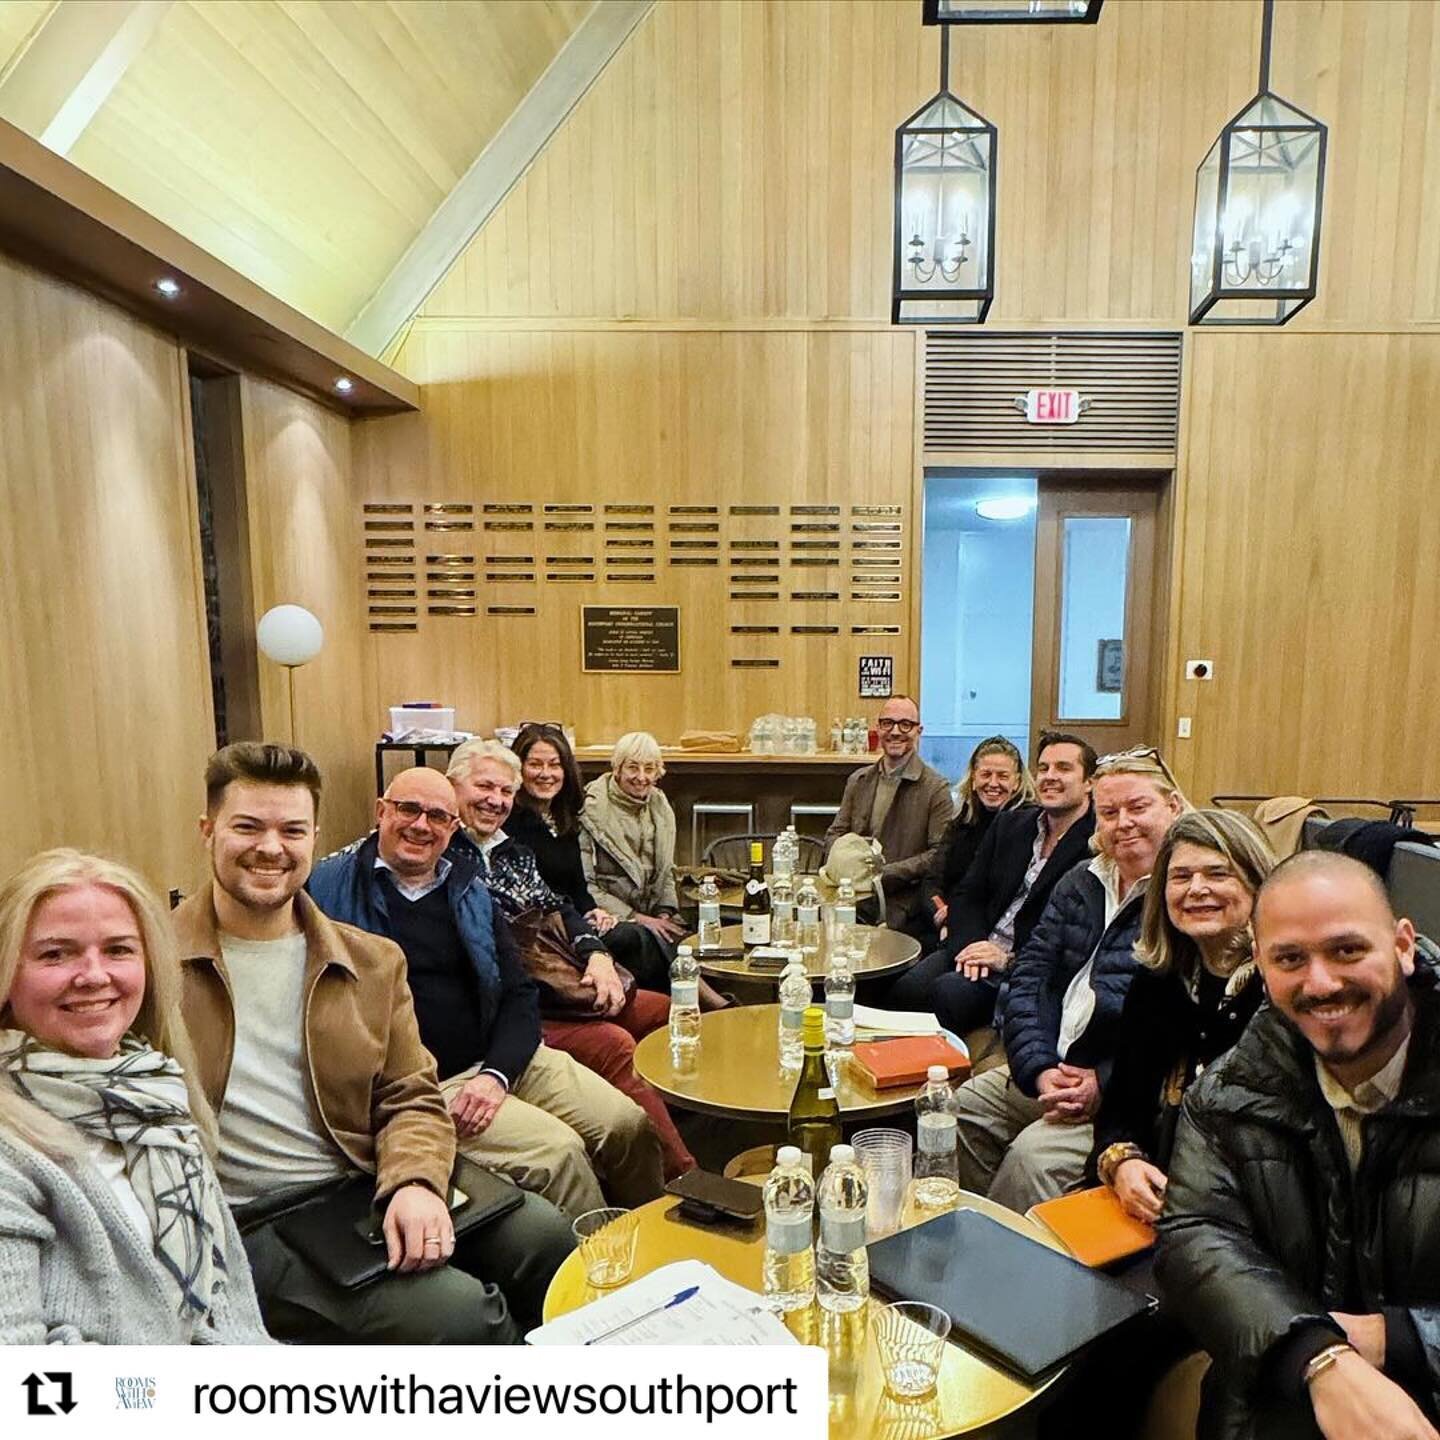 Honored as always to be part of this amazing organization.
@roomswithaviewsouthport #repost 

・・・
Greetings everyone - It&rsquo;s that time of year again!

Last night members of the 2024 Design Advisory Board met in the Hadley to kick off the plannin